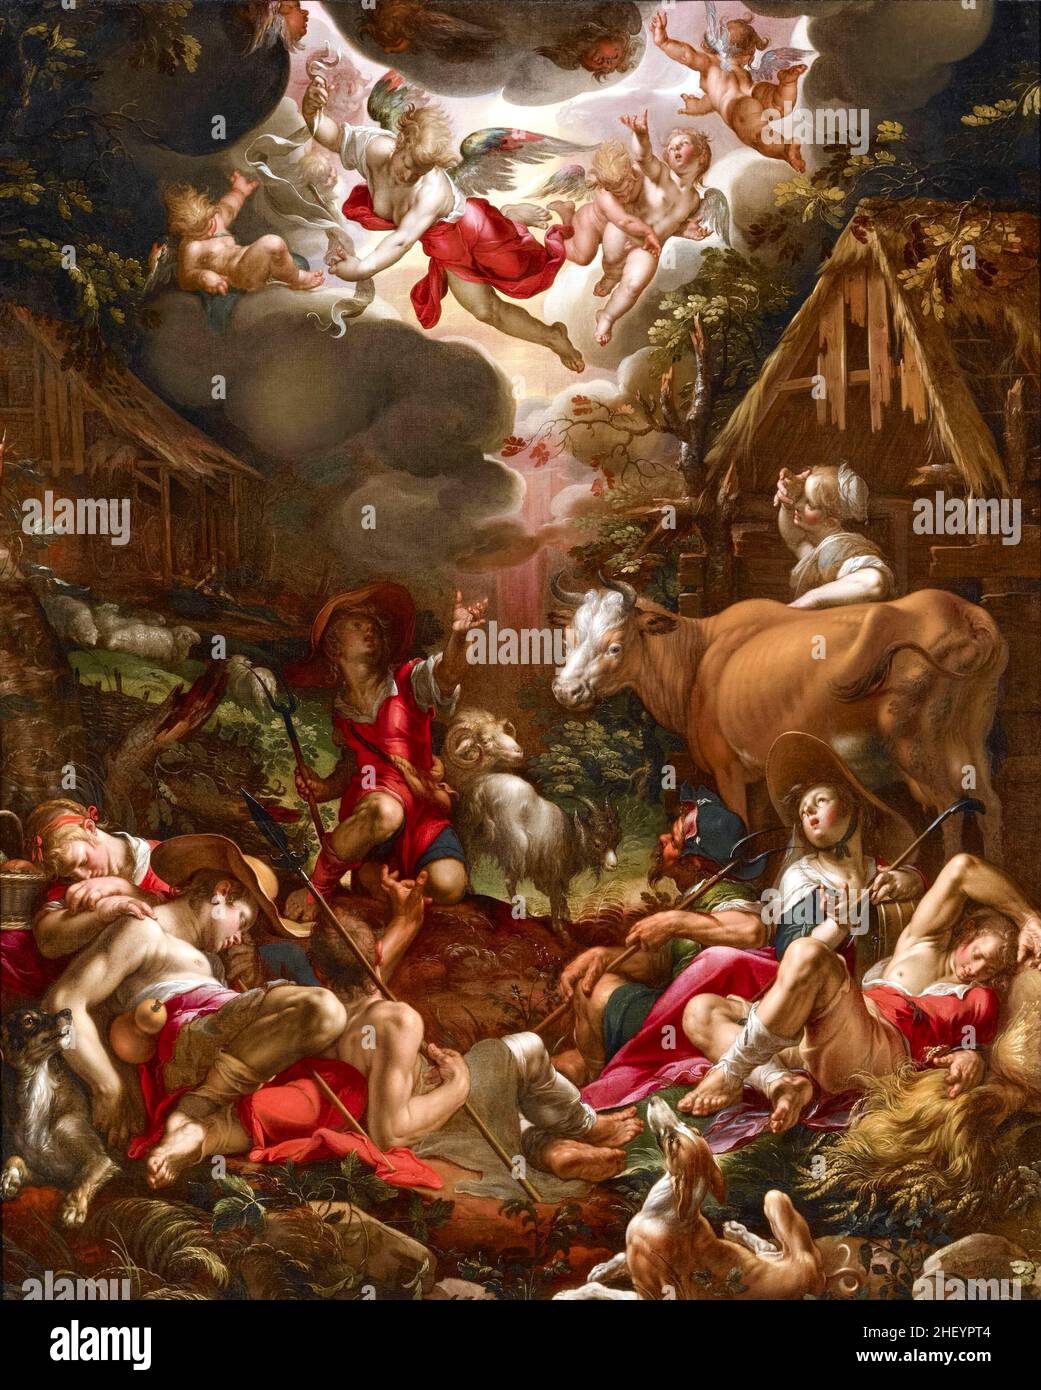 The Annunciation to the Shepherds, painting by Joachim Wtewael, 1606 Stock Photo